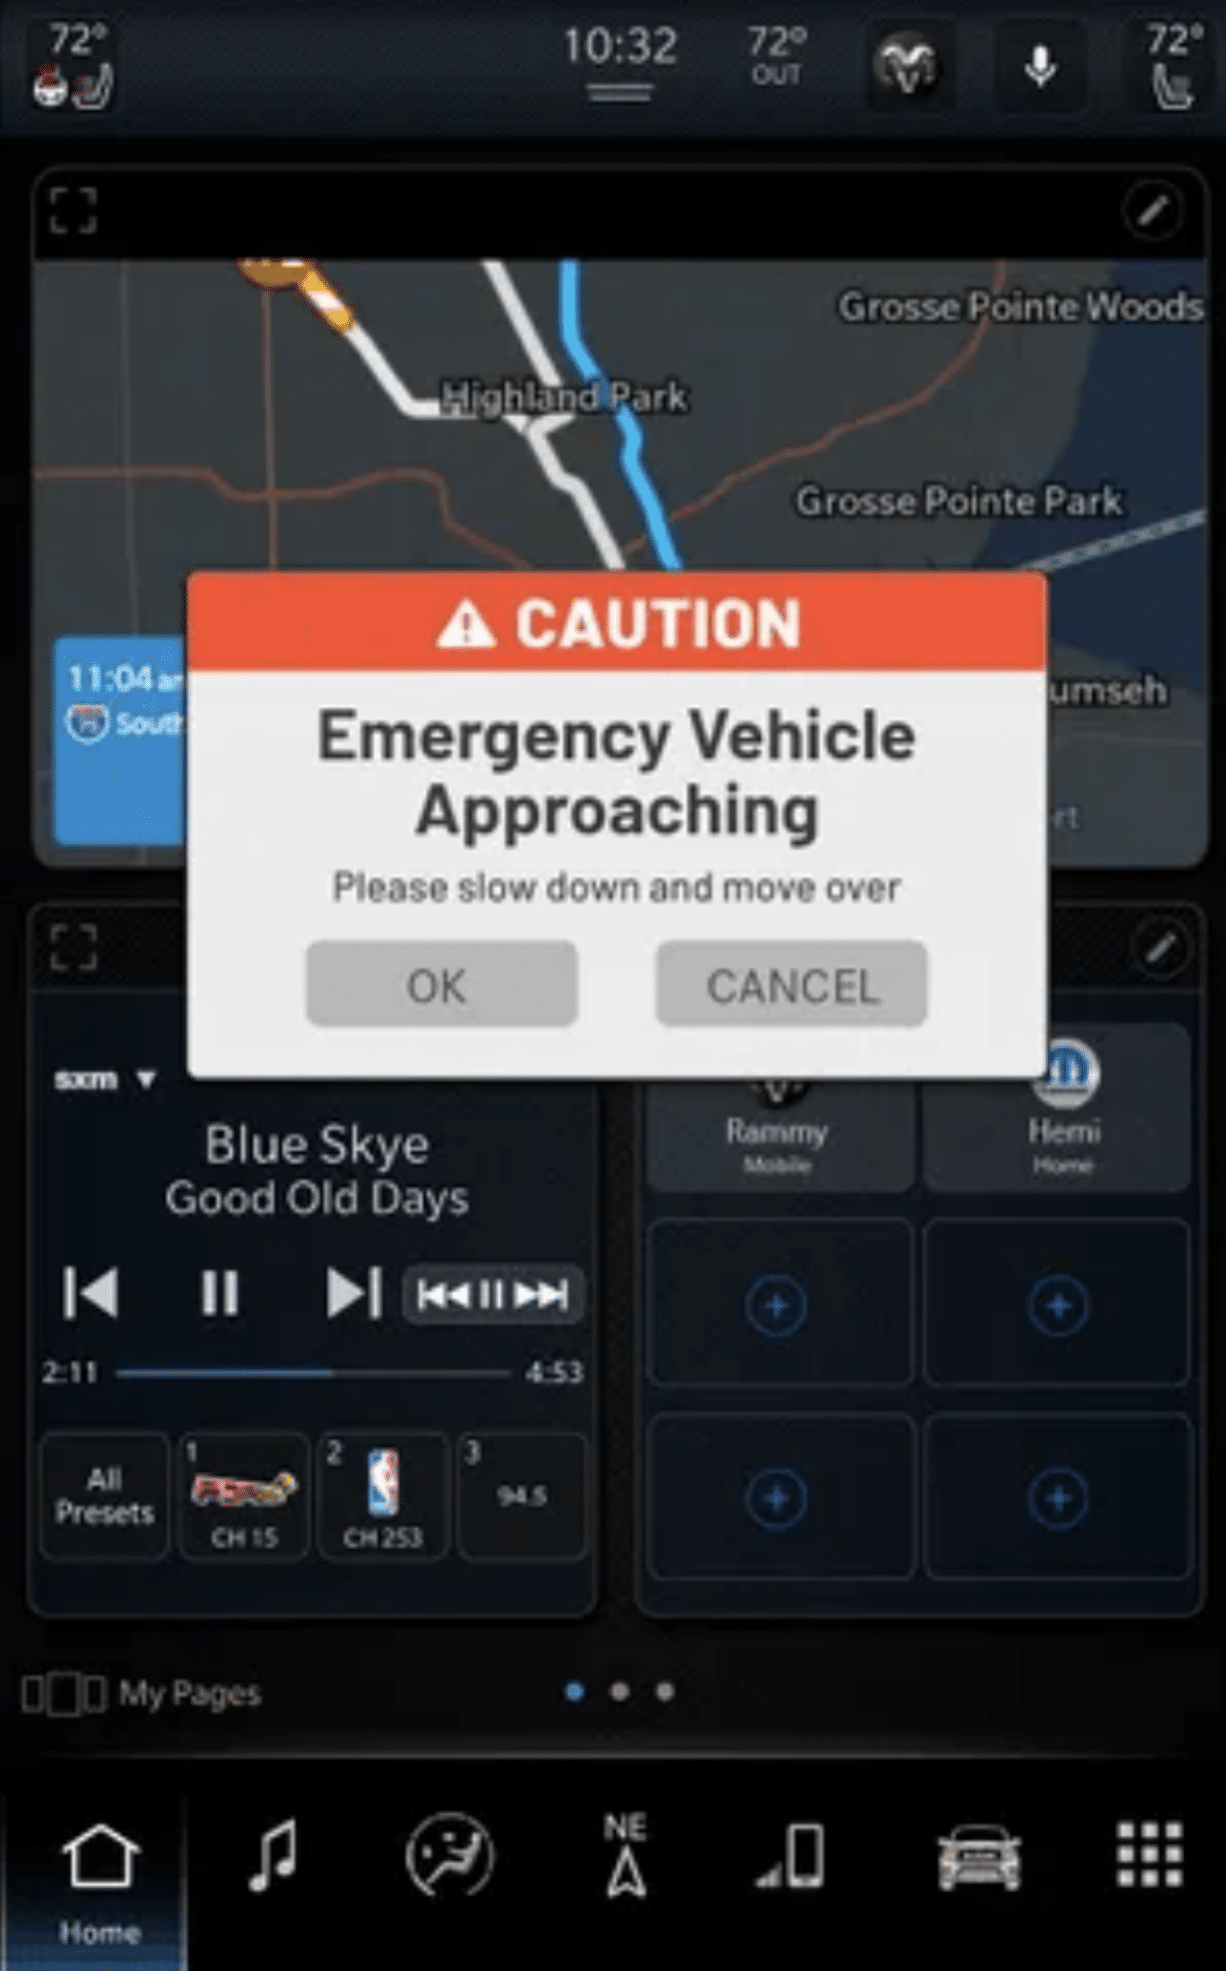 Stellantis First to Offer Emergency Vehicle Alert System The Detroit